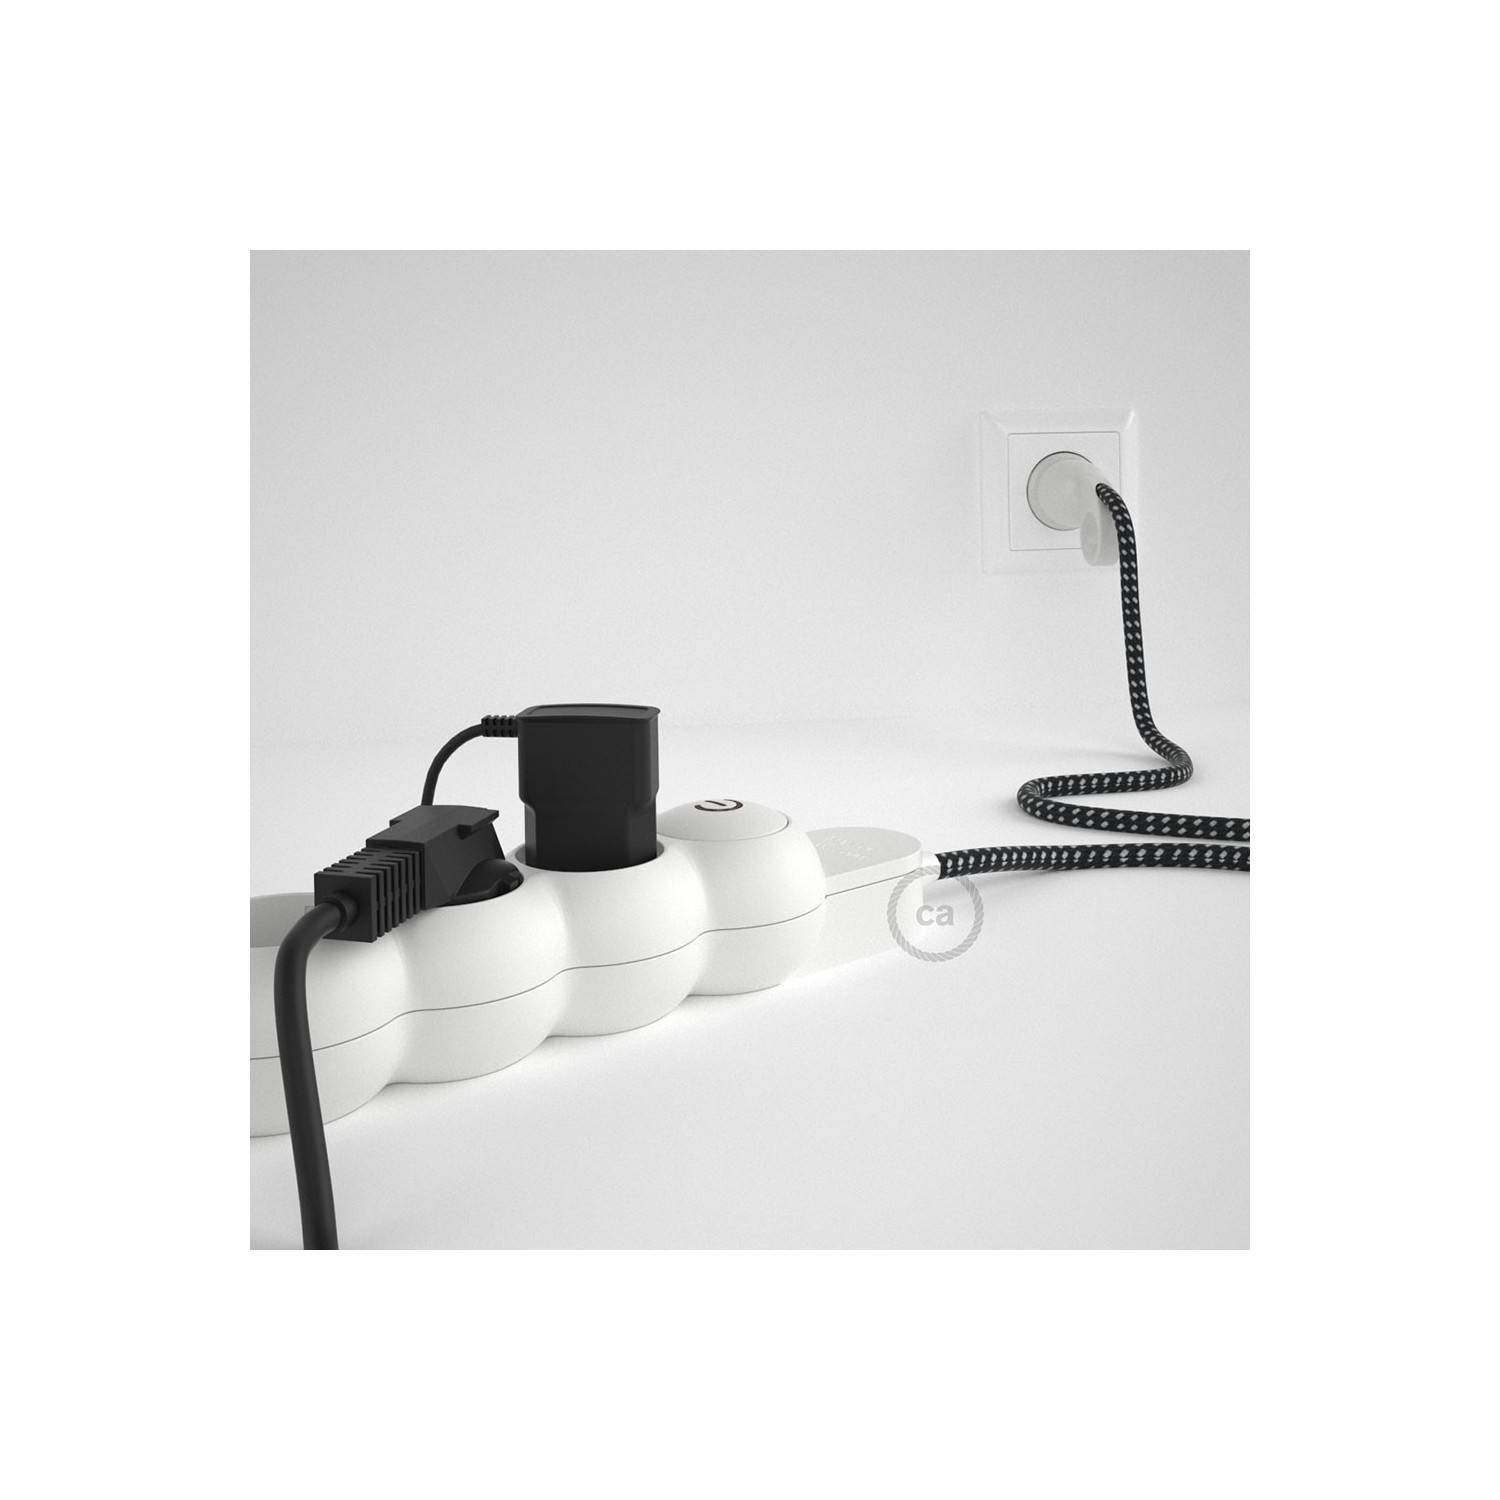 French power strip with electrical cable covered in 3D effect fabric RT41 Stars and Schuko plug with confort ring